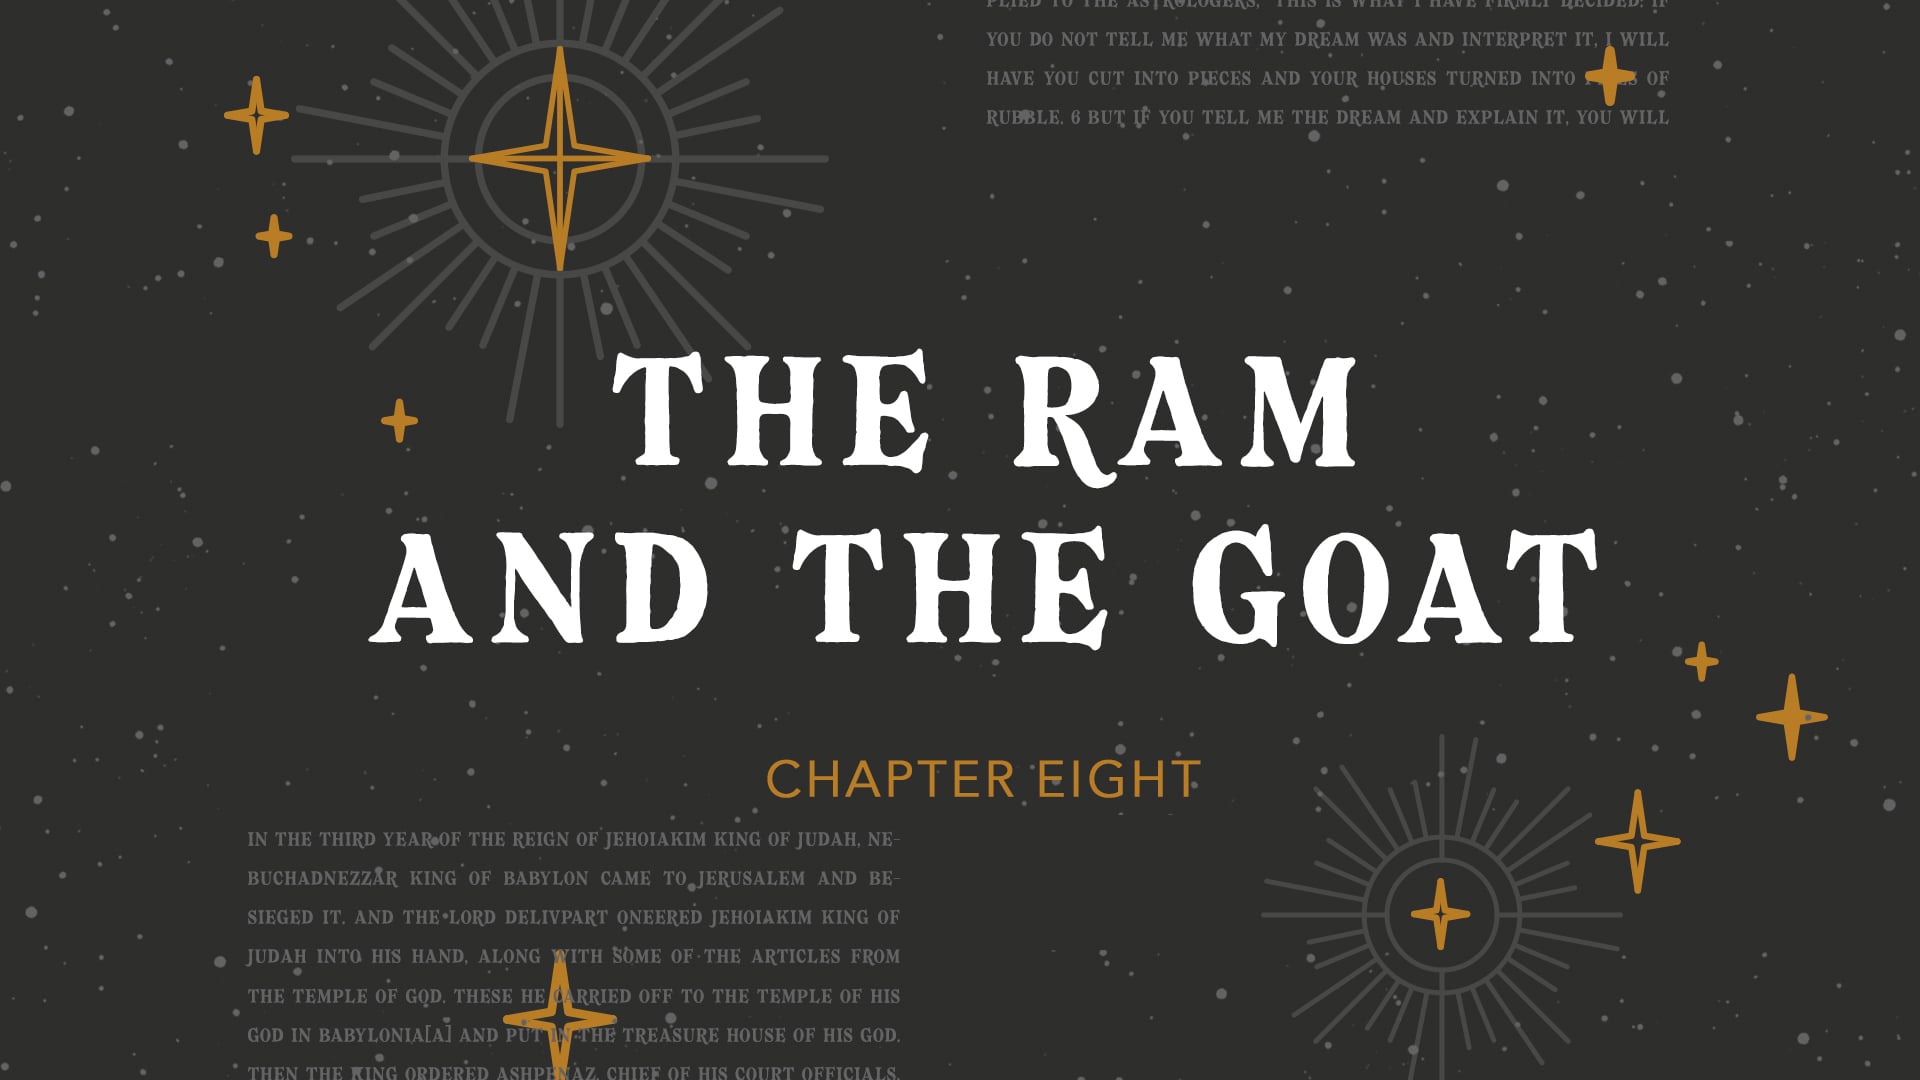 The Book of Daniel - The Ram and The Goat (Chapter 8)